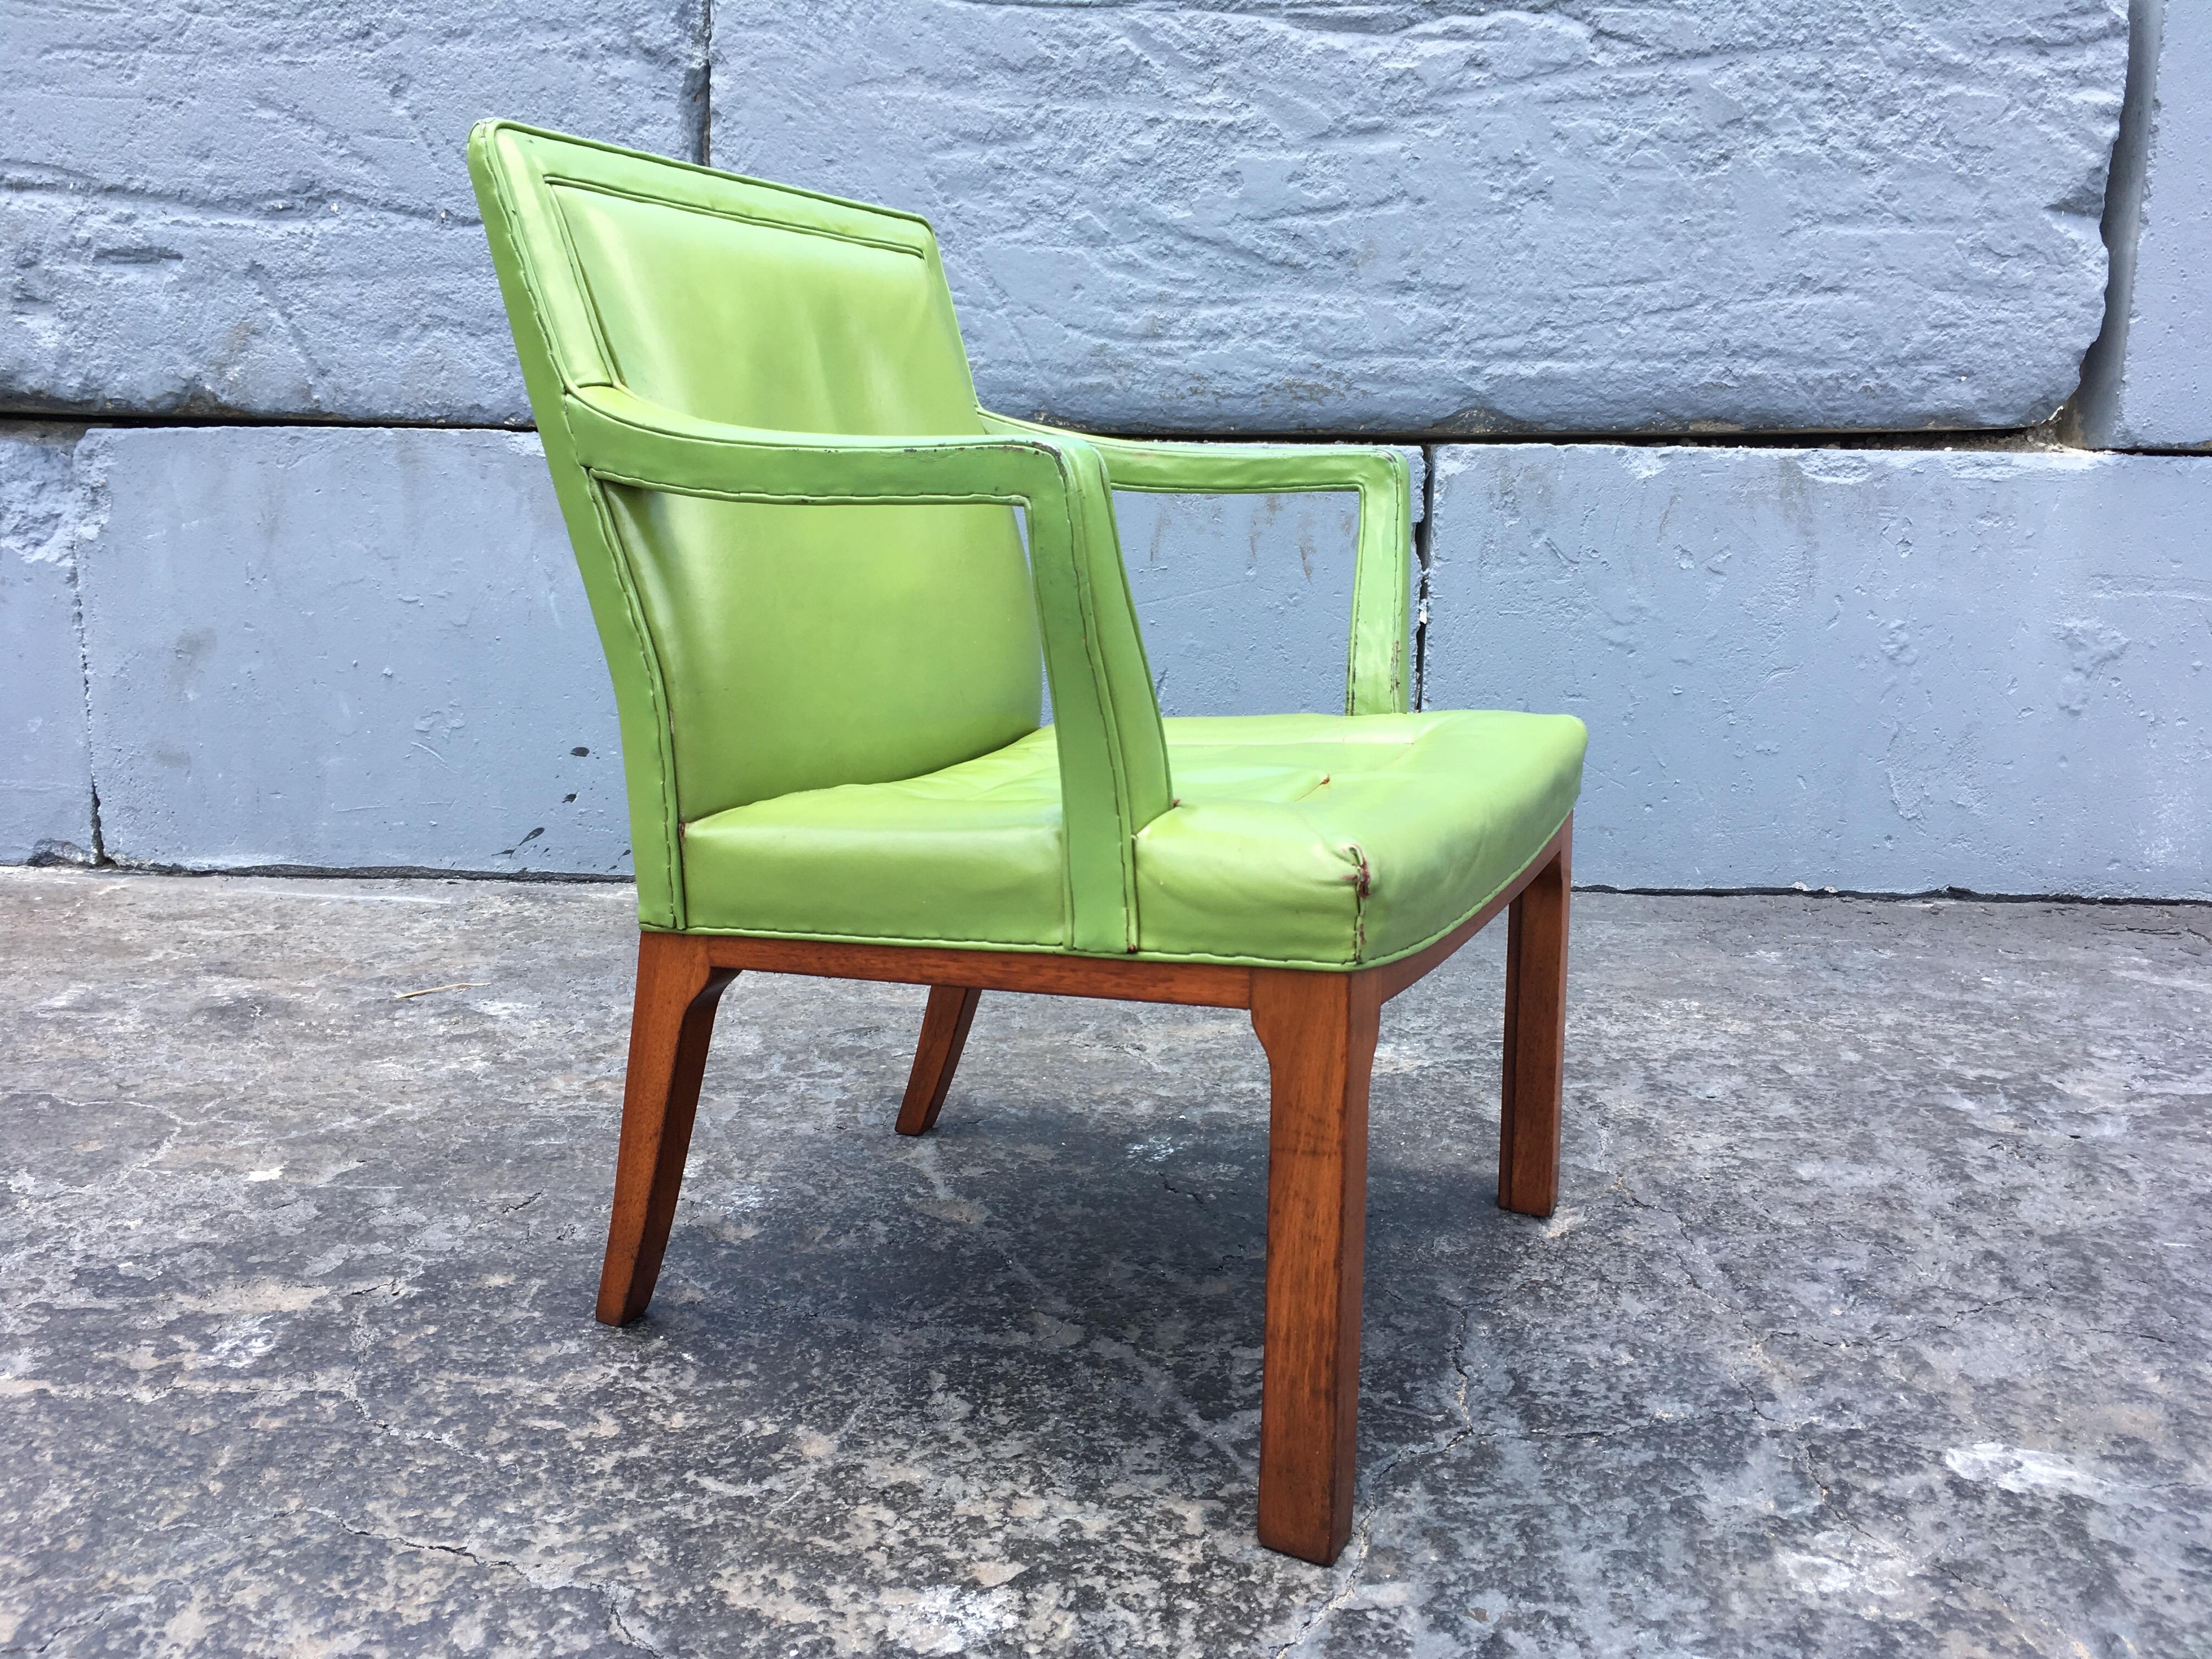 Rare green leather chair by Edward Wormley for Dunbar. Leather has some damages.